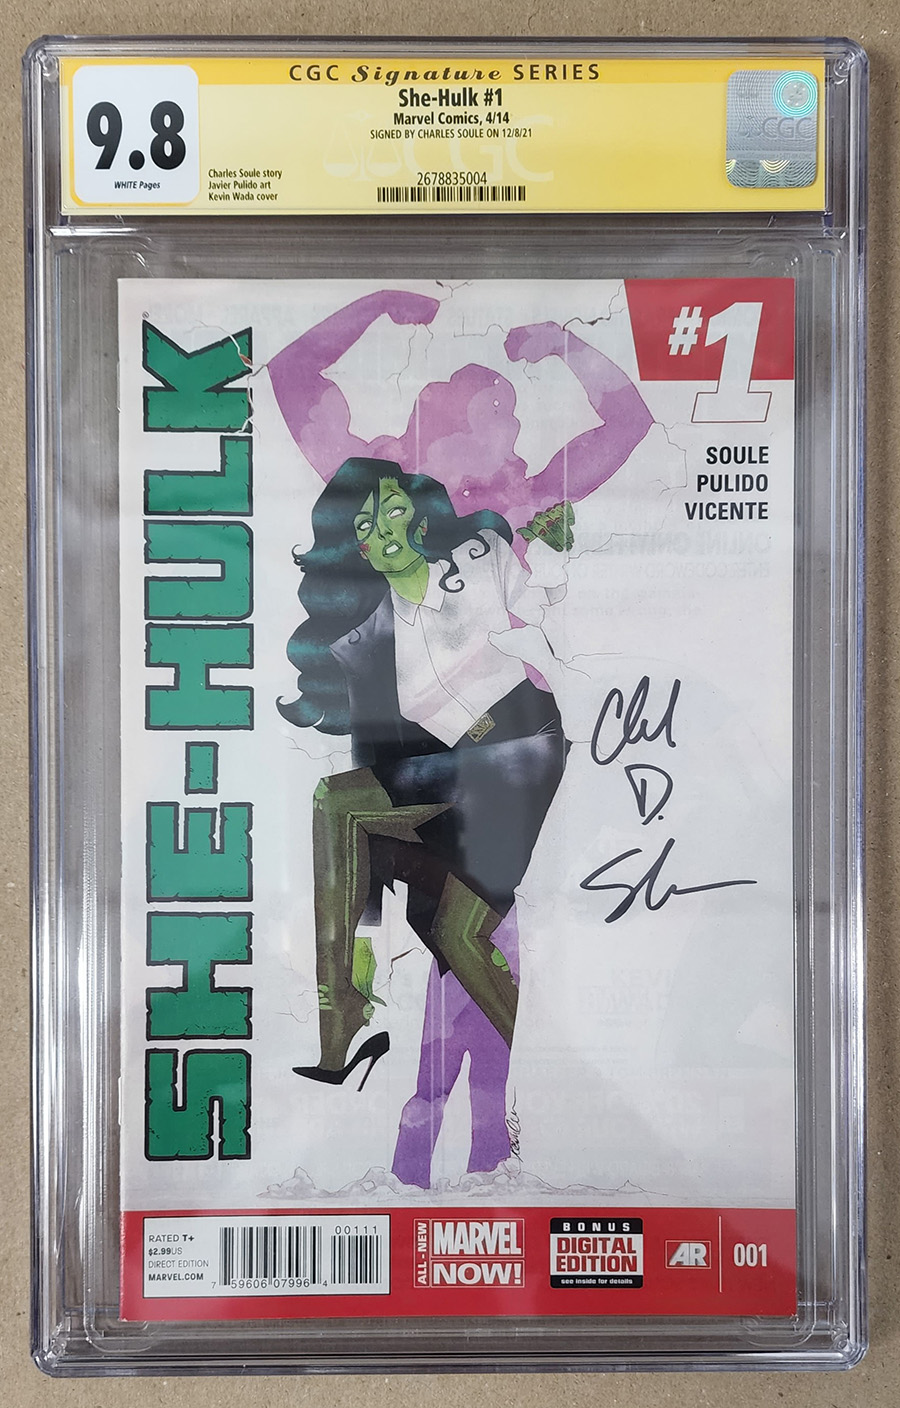 She-Hulk Vol 3 #1 Cover I 1st Ptg Regular Kevin Wada Cover Signed By Charles Soule CGC 9.8